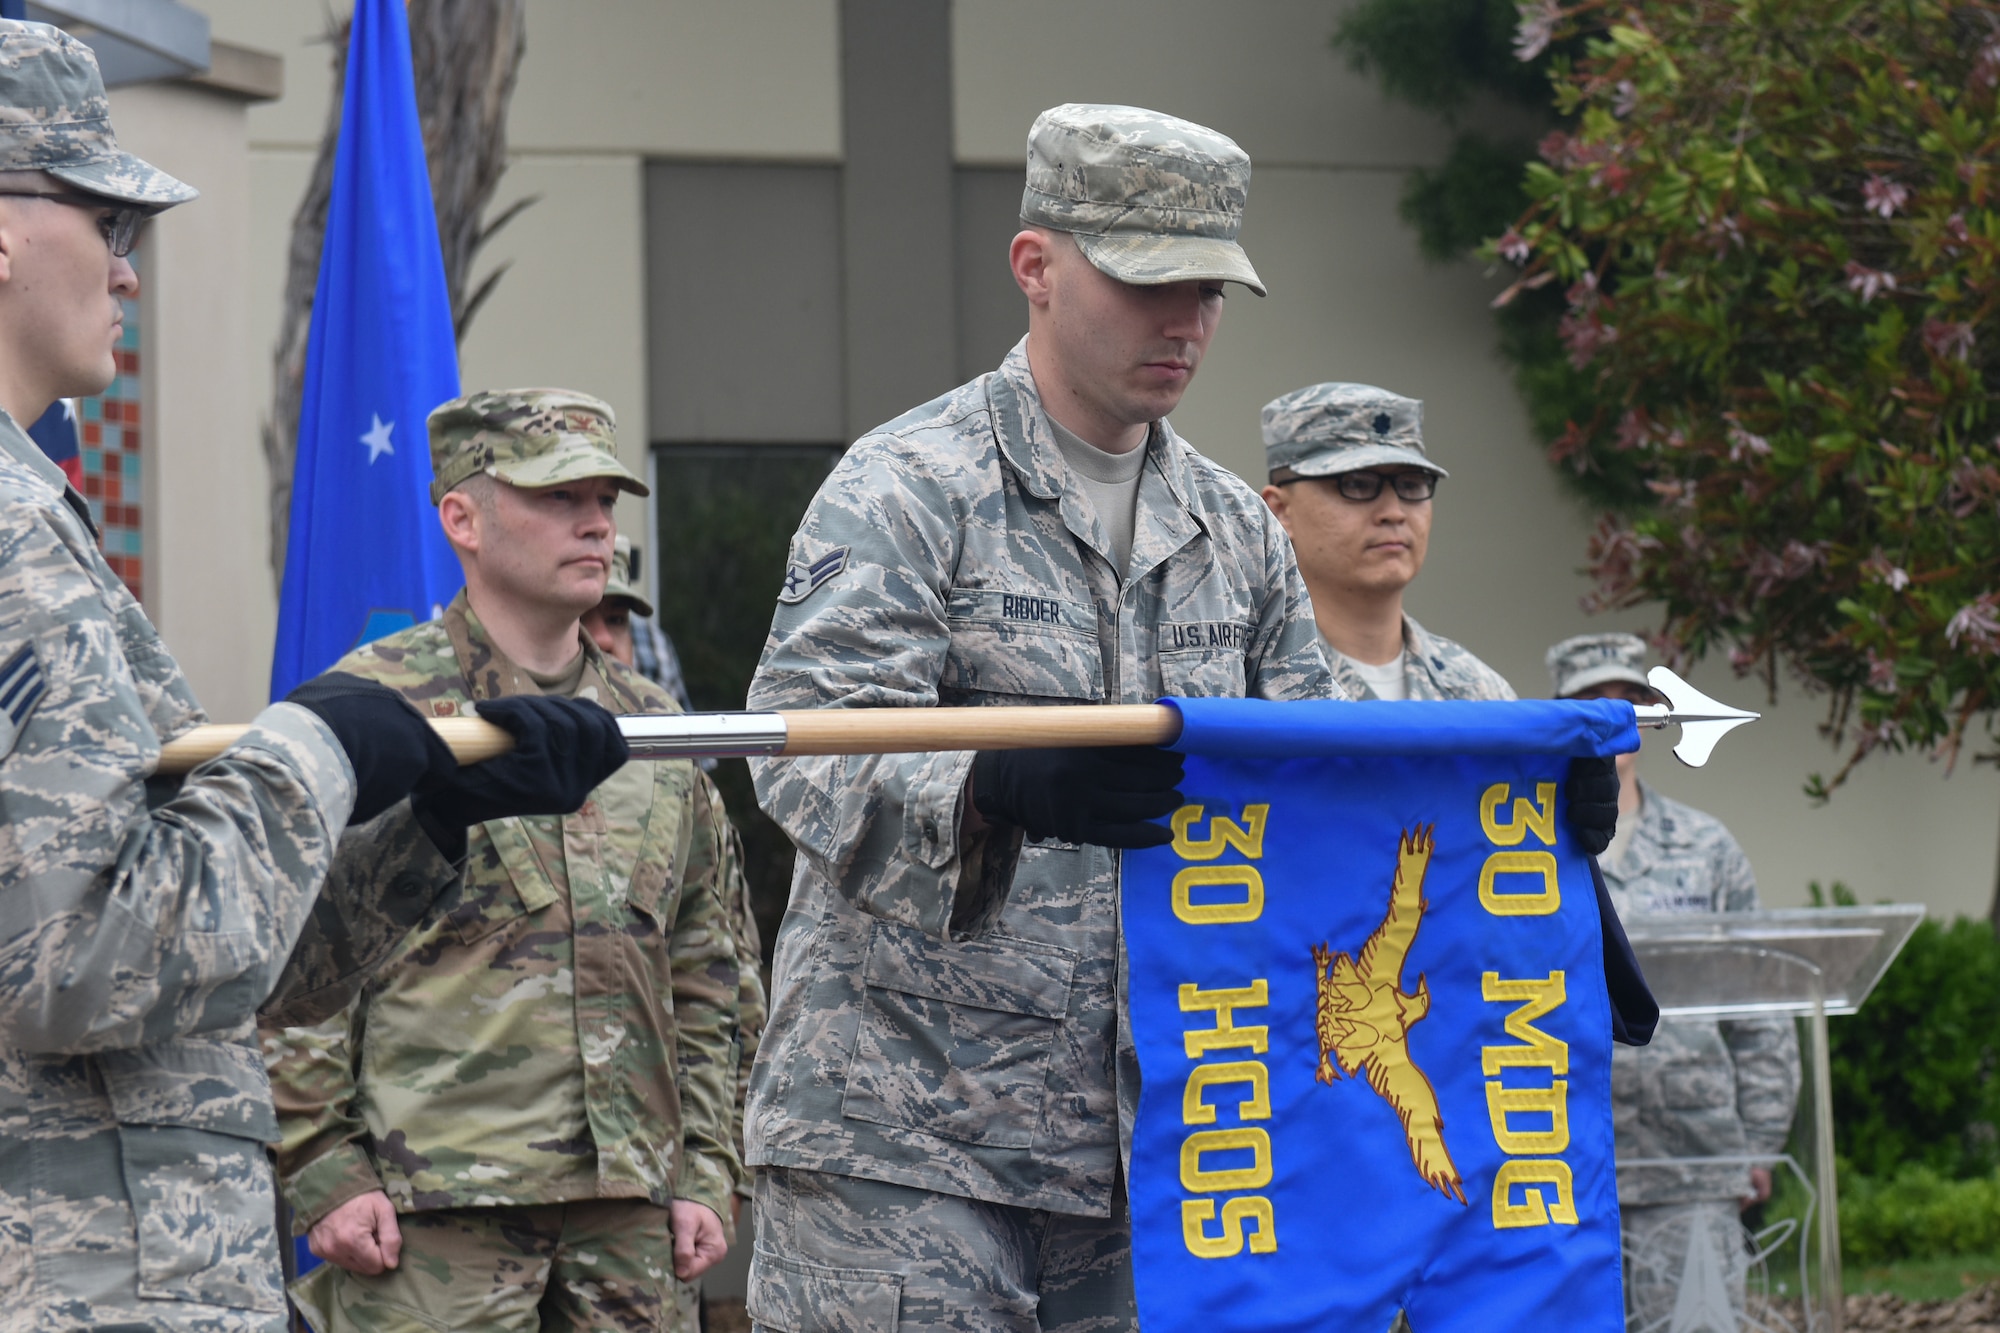 Airman First Class Thomas Ridder, Vandenberg Color Guard member, unfurls a guidon for the newly activated 30th Health Care Operations Squadron during the 30th MDG reorganization ceremony Aug. 23, 2019, at Vandenberg Air Force Base, Calif.